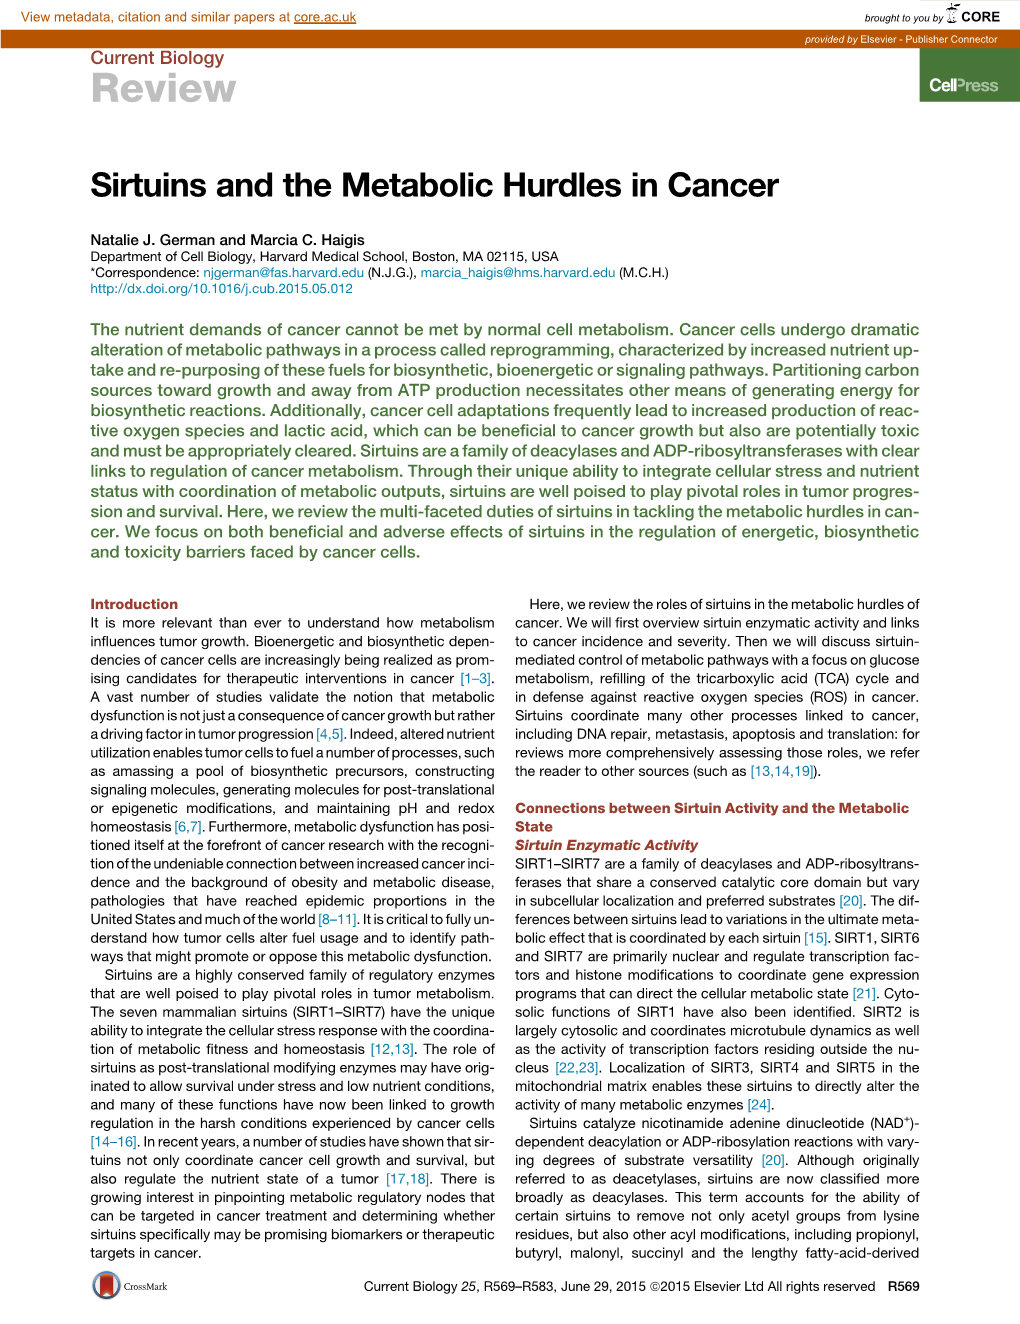 Sirtuins and the Metabolic Hurdles in Cancer